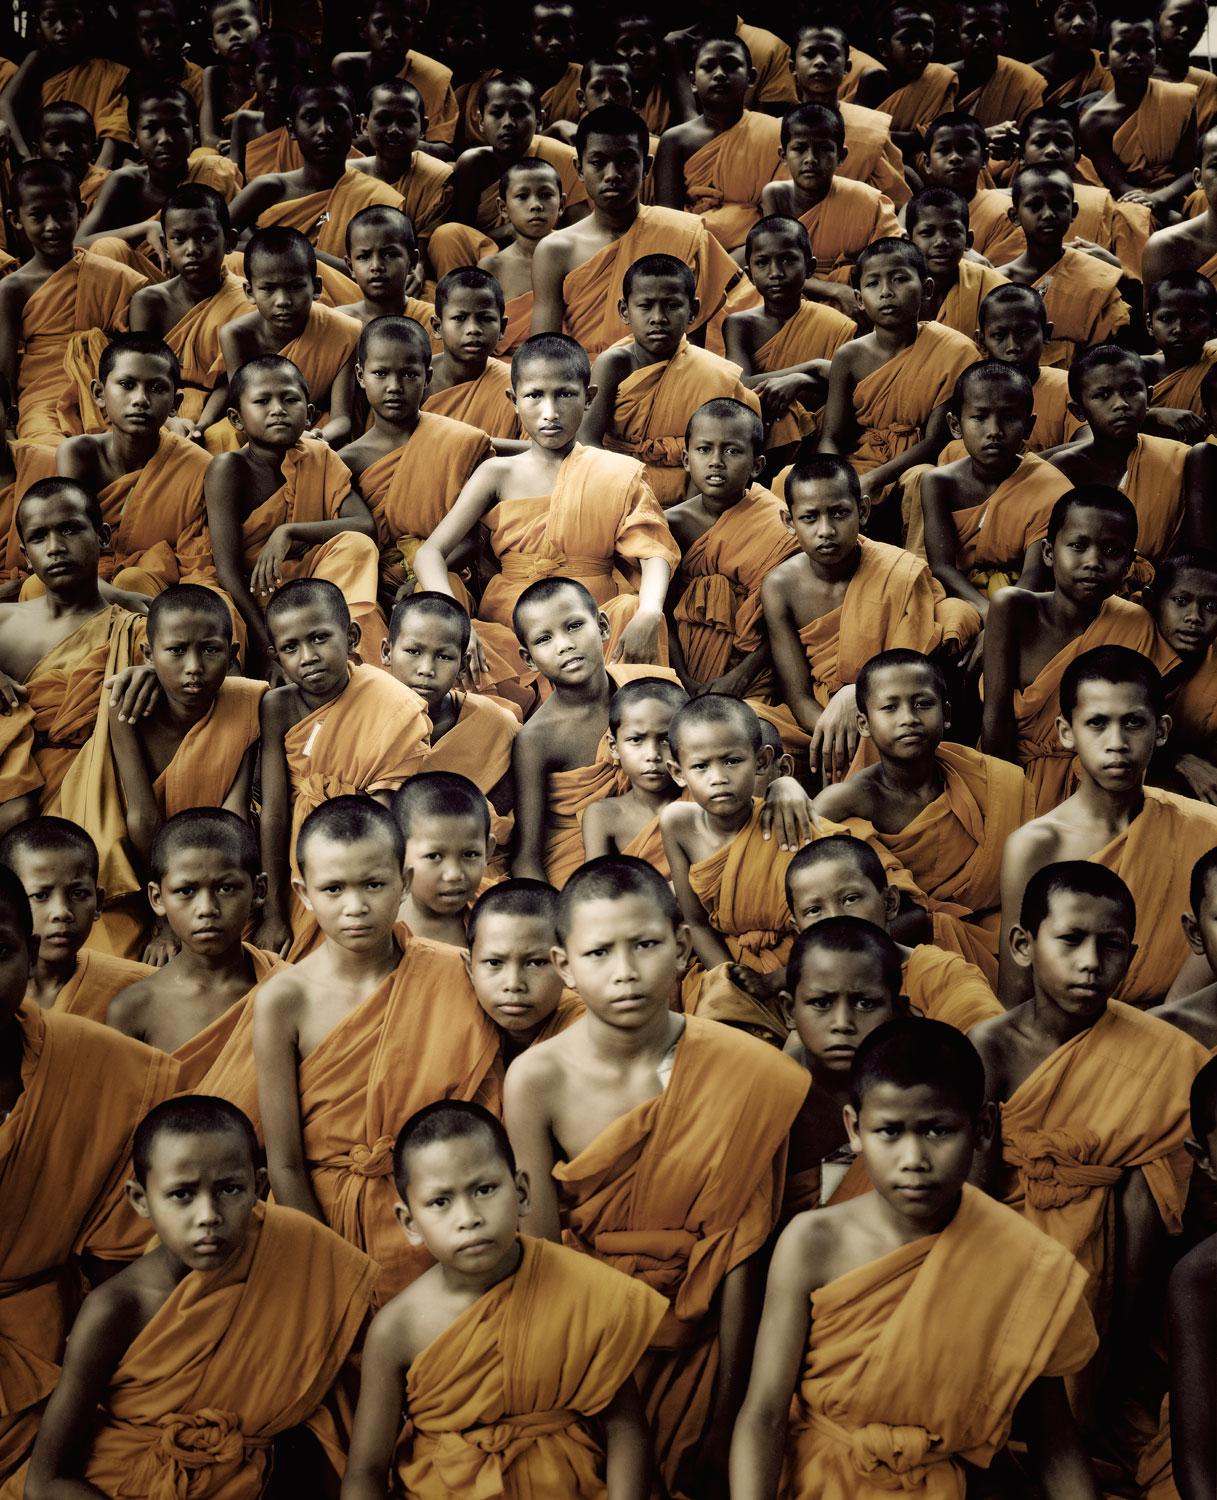 "XIX 330 v- Buddhist Monks - Ganden Monastery - Tibet, 2011

The approximate 5.5 million Tibetans are an ethnic group with specific traditions. Archaeological and geological discoveries indicate that the Tibetans are descendants of aboriginal and